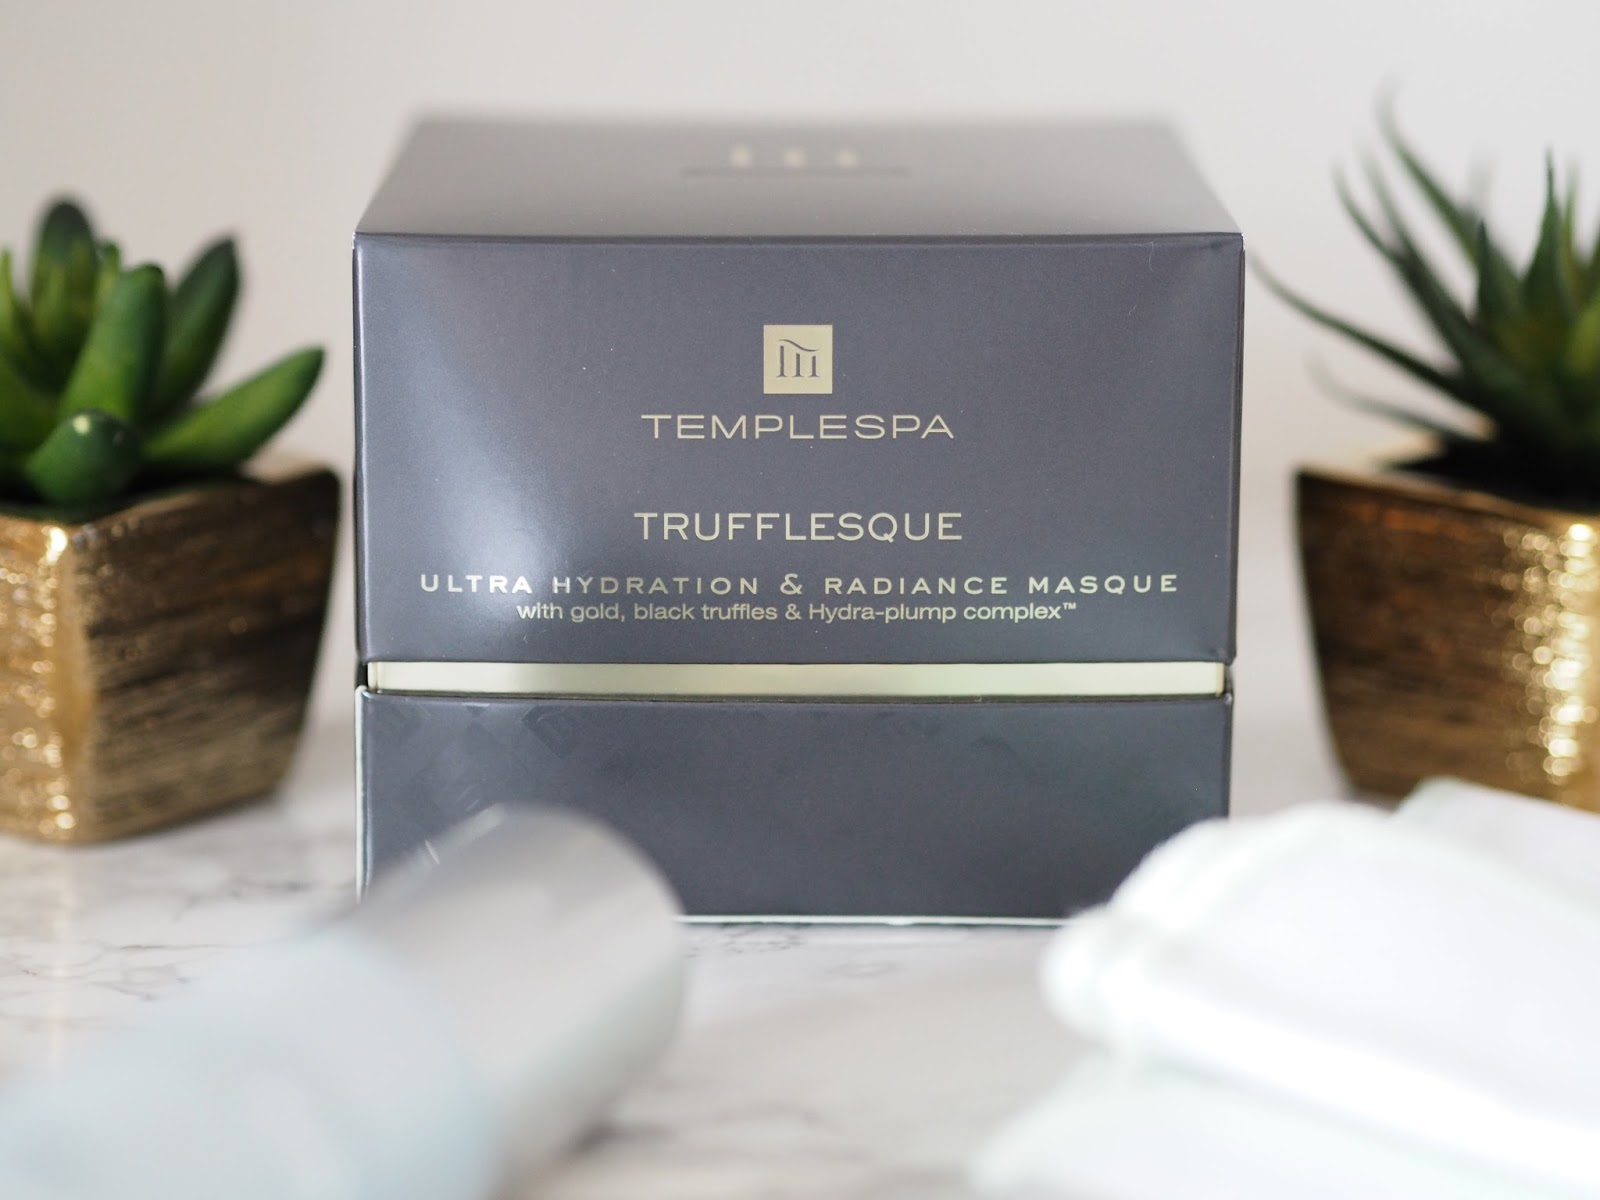 beauty \ face mask \ Temple Spa \ Trufflesque \ The Contourist review \ Liz Earle \ Exuviance review \ skincare \ Priceless Life of Mine \ Over 40 lifestyle blog